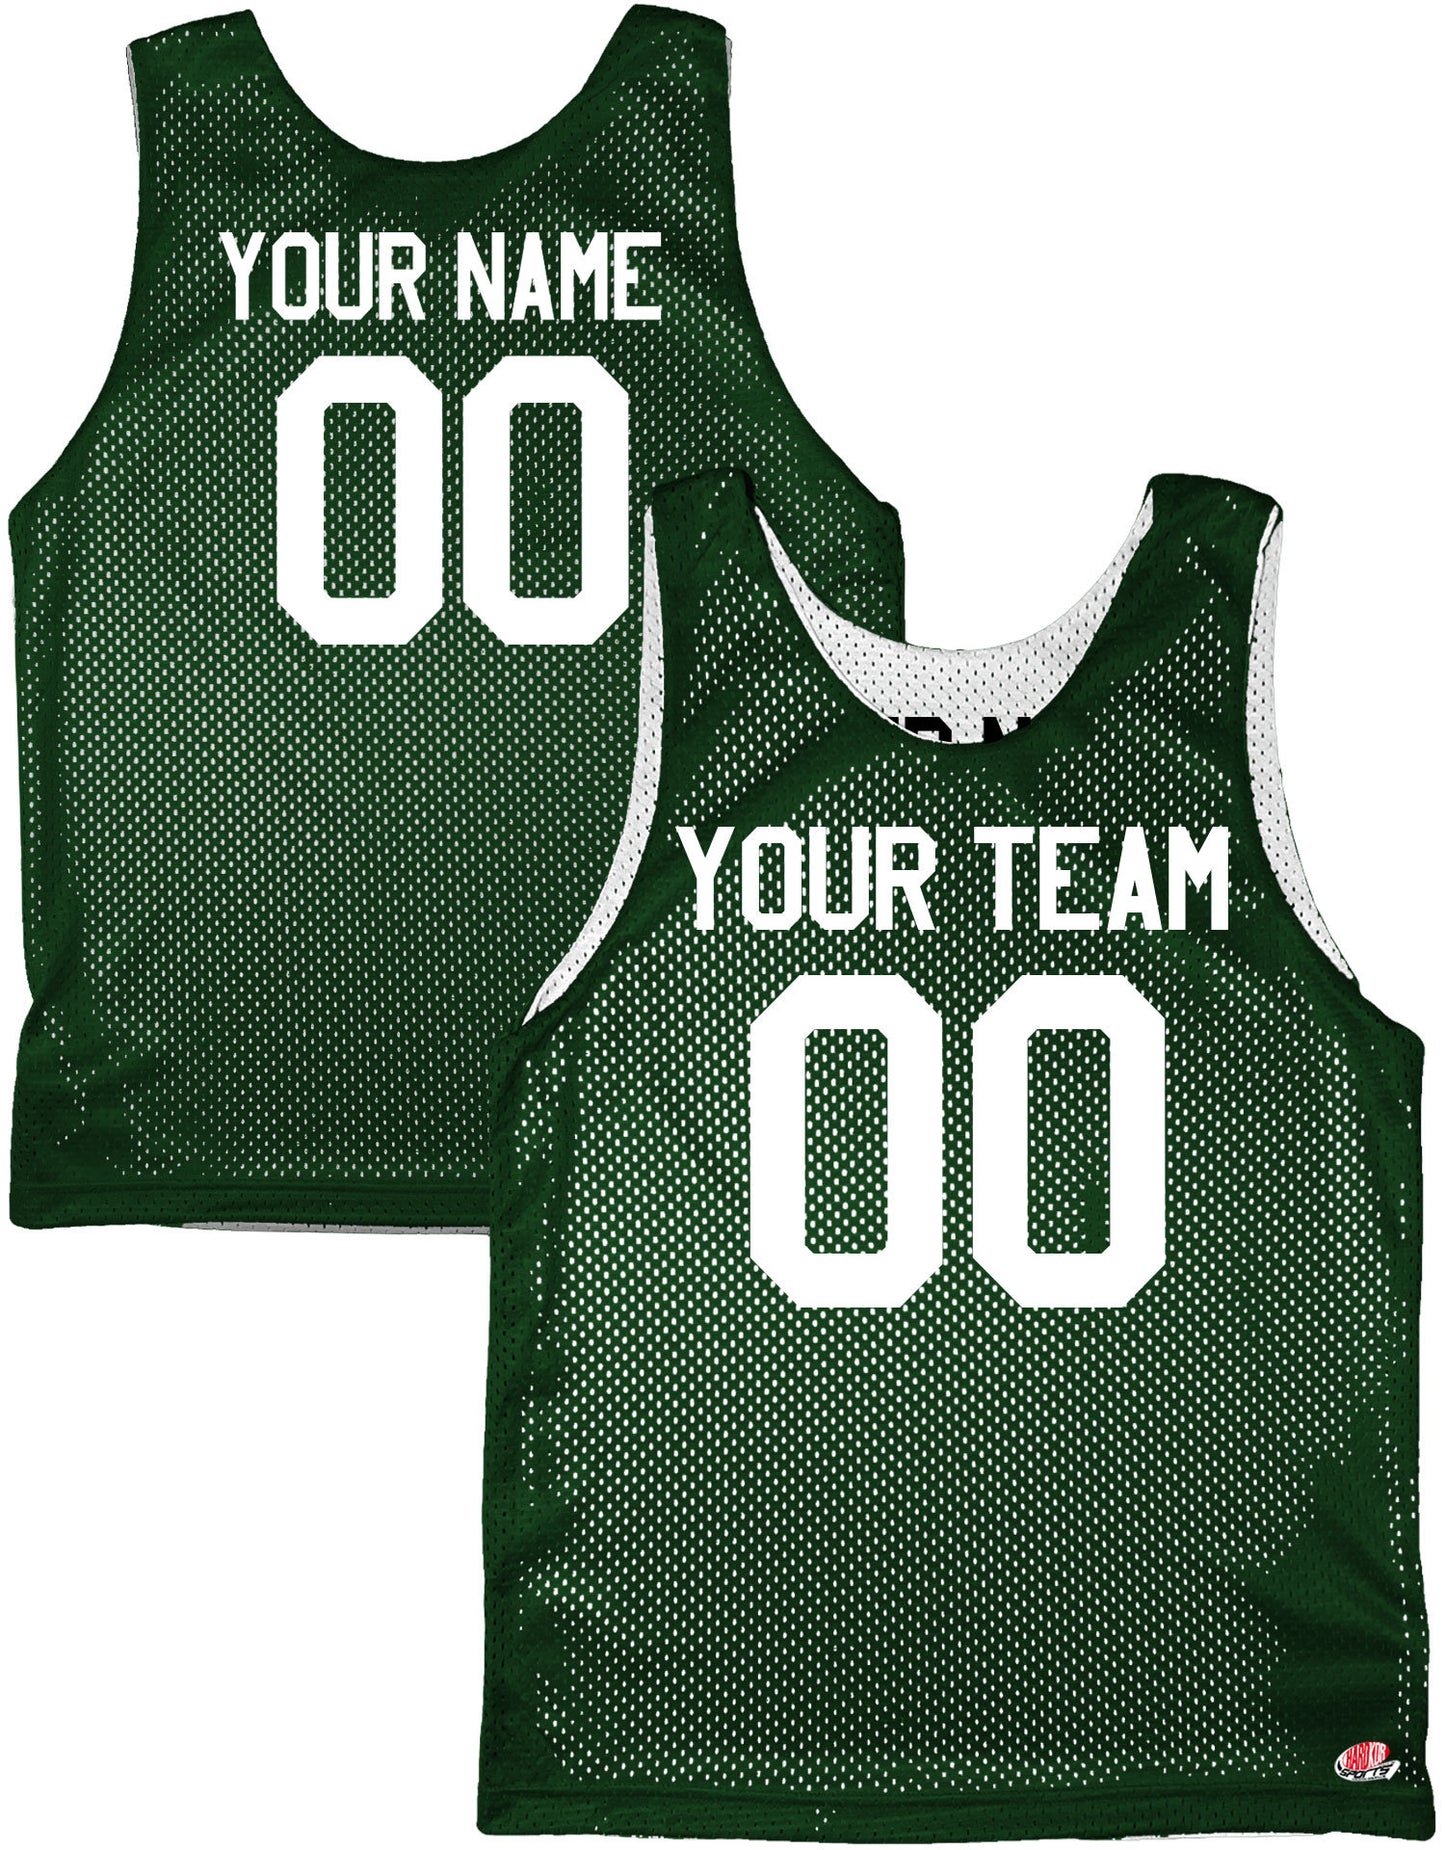 Dark Forest Green, Vegas Gold, Gold, Black and White | Custom Reversible Basketball Jersey | Tricot Mesh.  Team, Player Name, Numbers